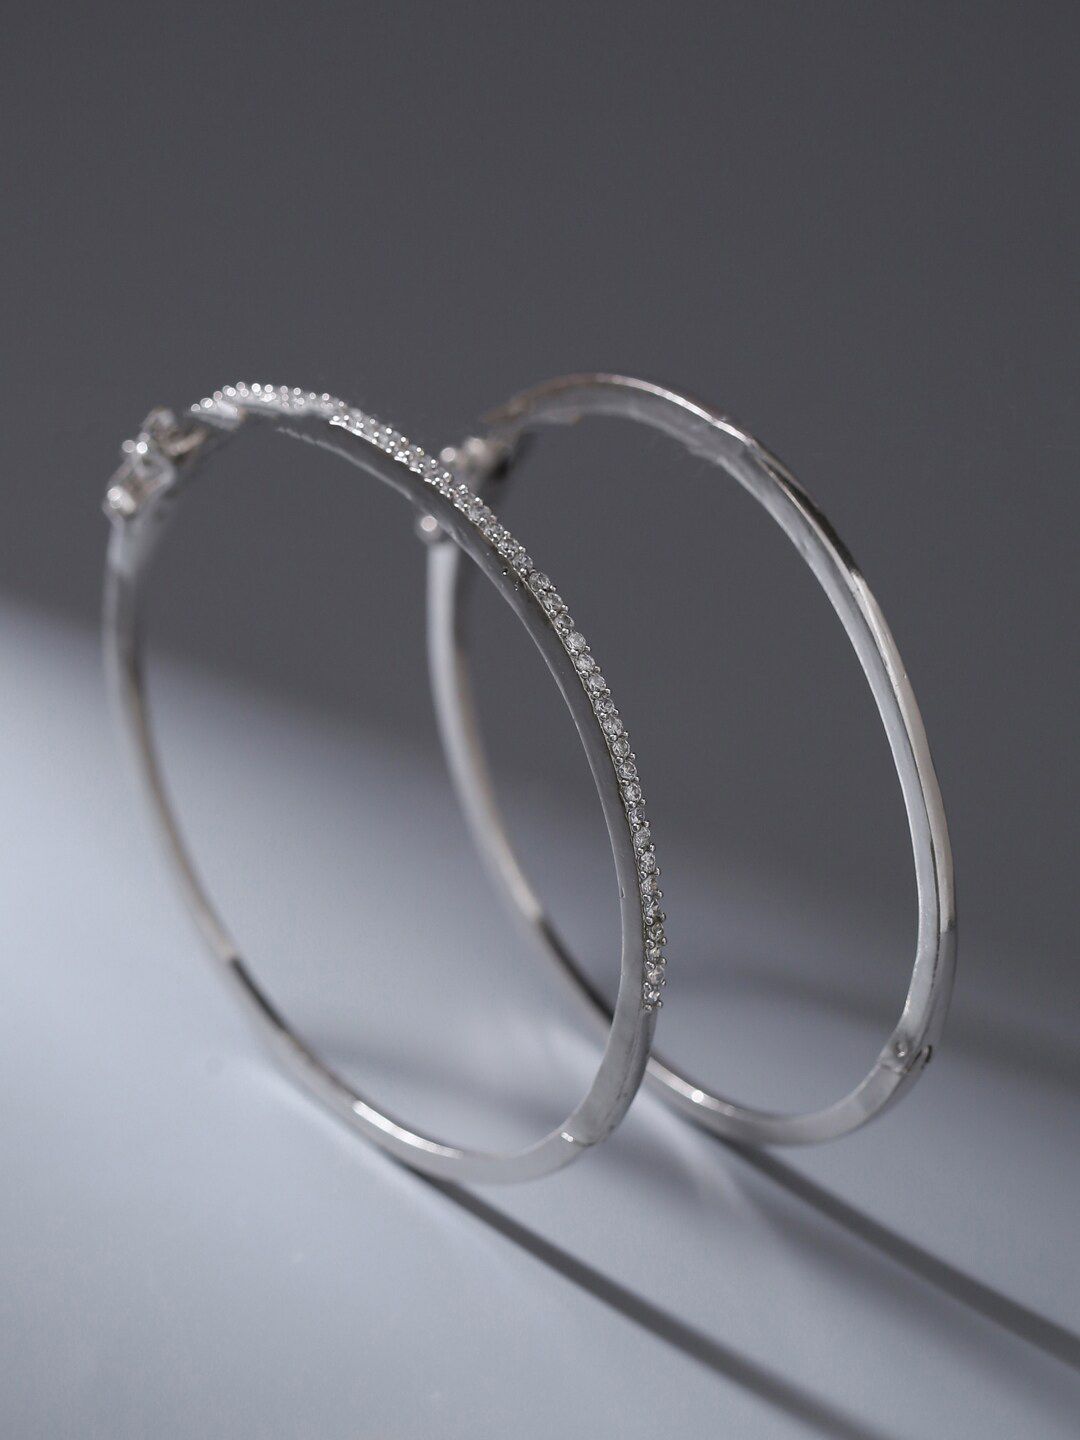 ADORN by Nikita Ladiwala Pack Of 2 Silver-Toned Sterling Silver Bangle-Style Bracelet Price in India